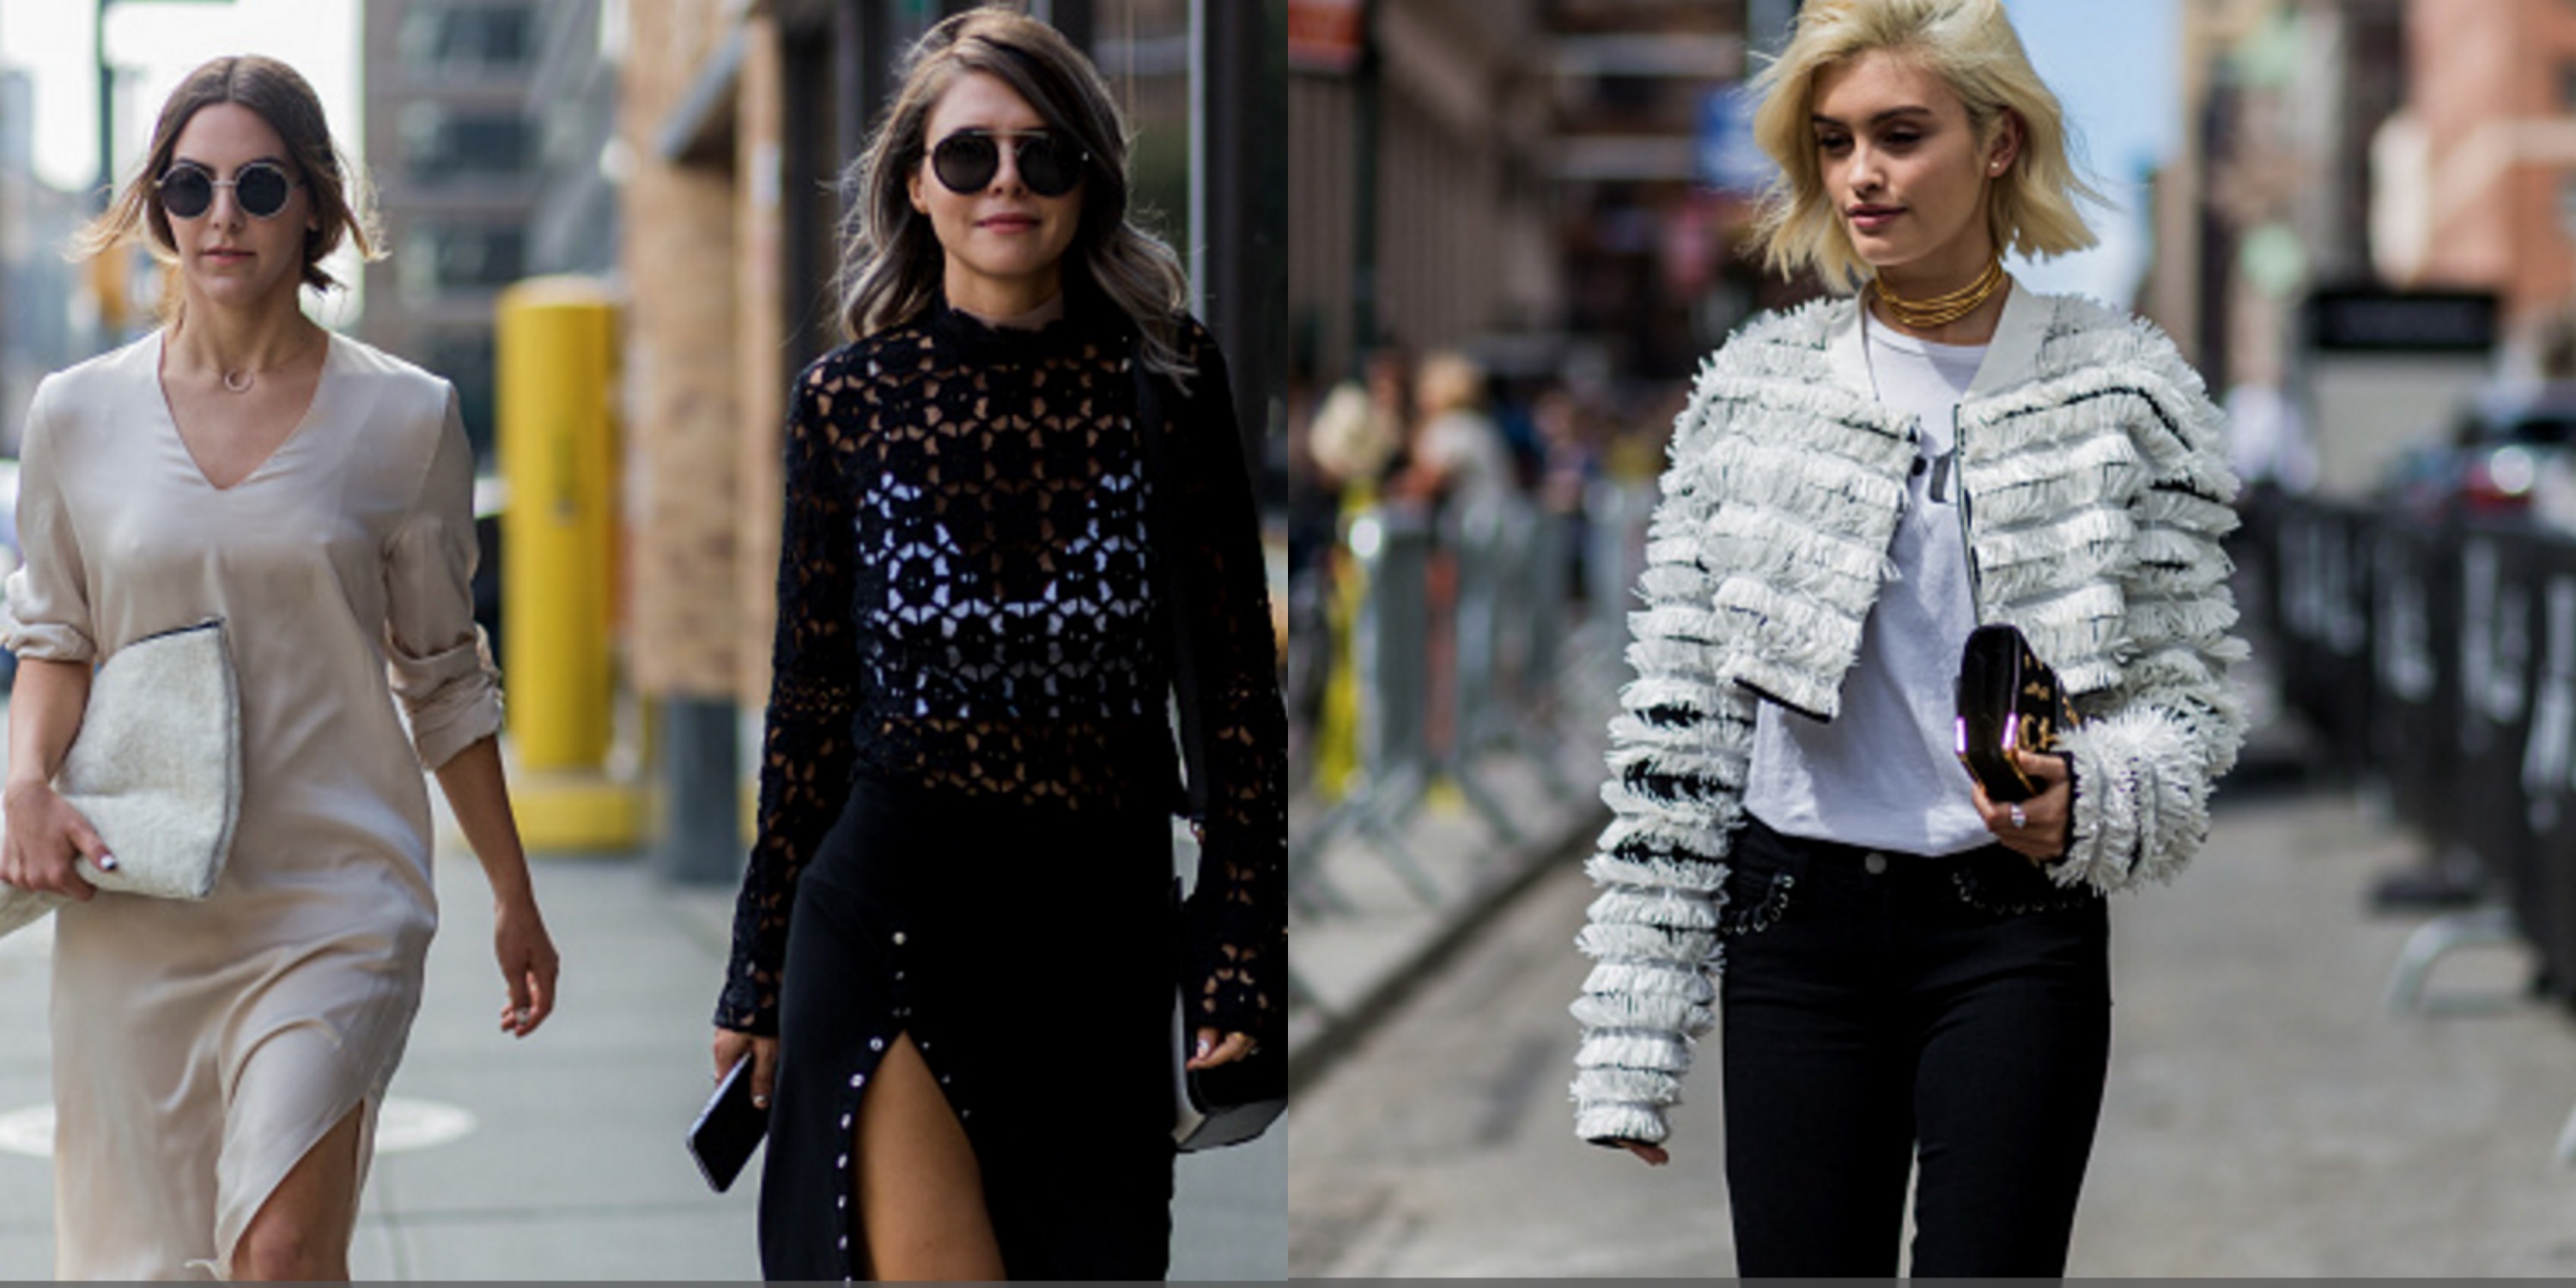 Style Meets the Streets at NYFW